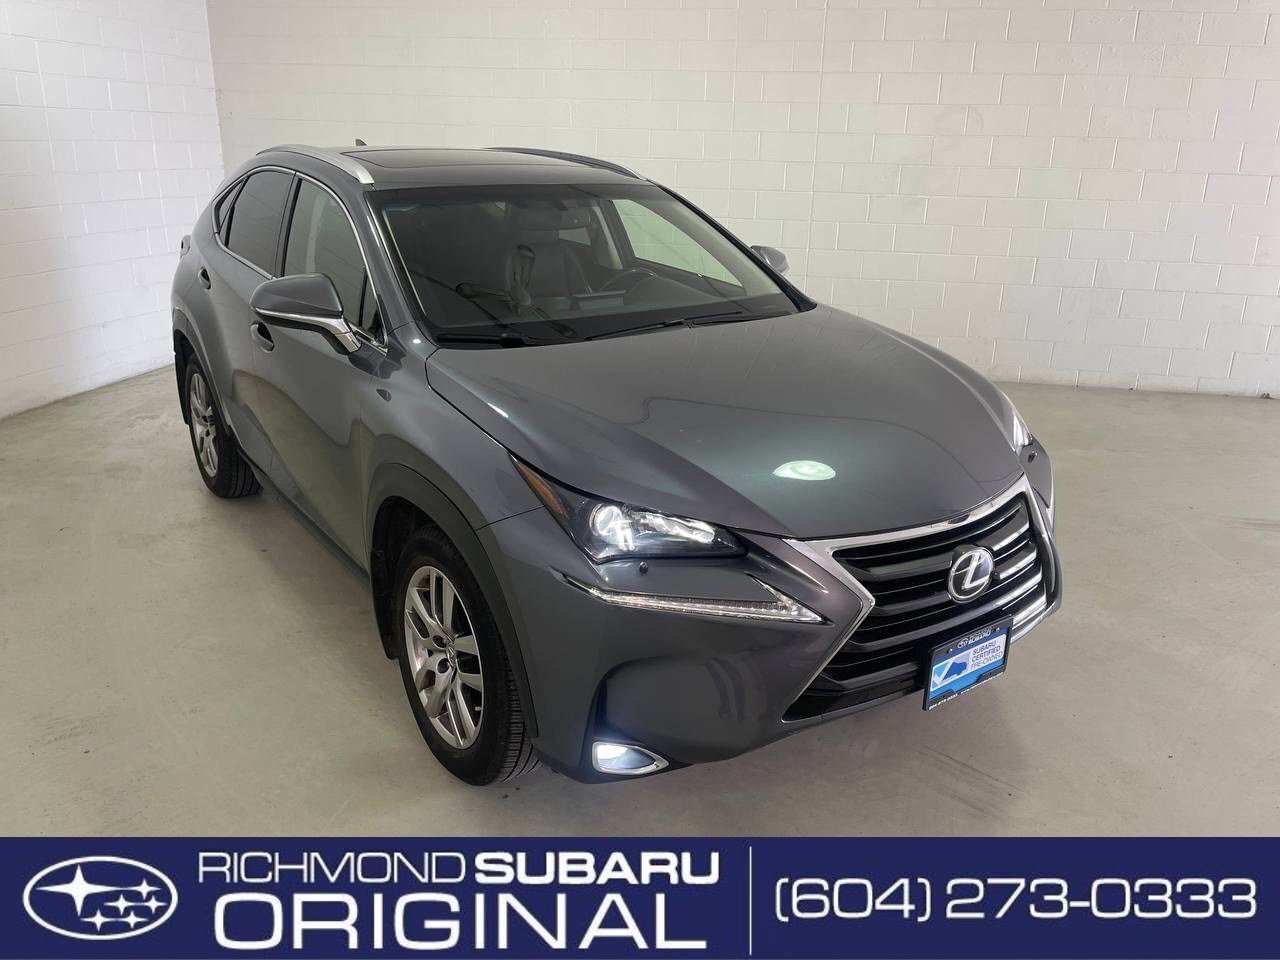 2017 Lexus NX 200t 200T | KEYLESS ENTRY | CALL TO RESERVE